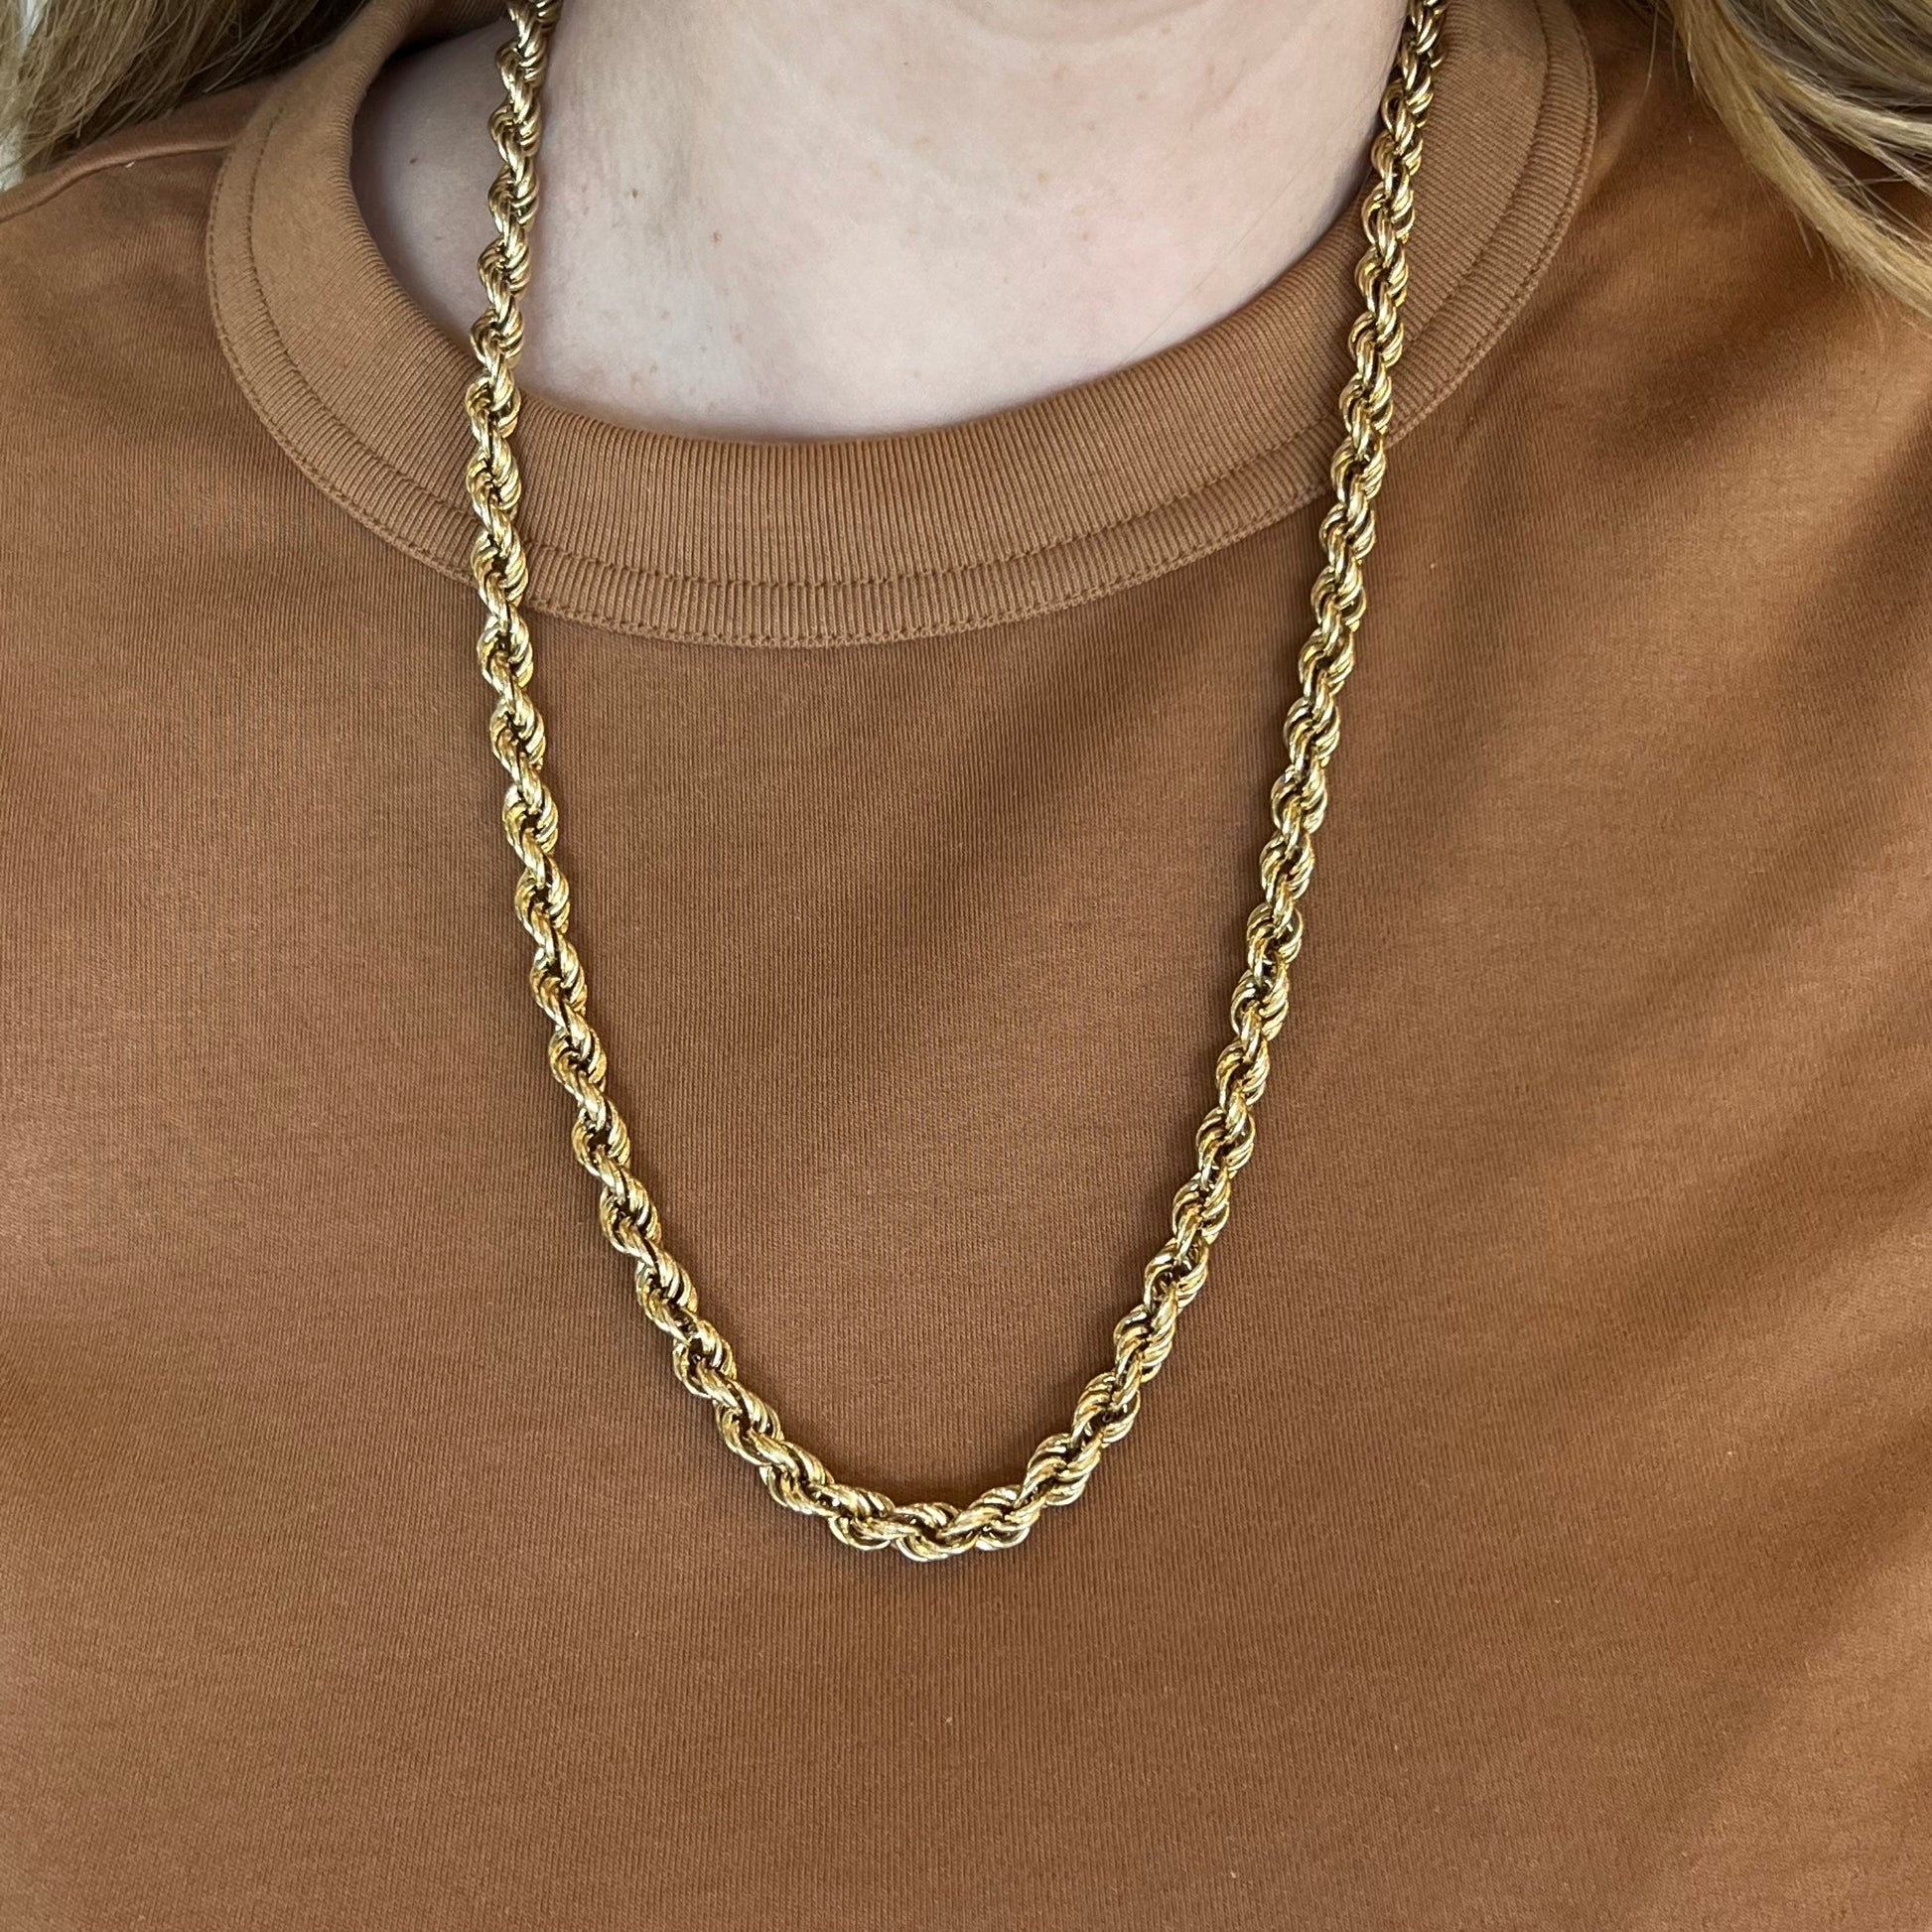 24 Inch Oversized Rolo Chain in 14k Yellow Gold